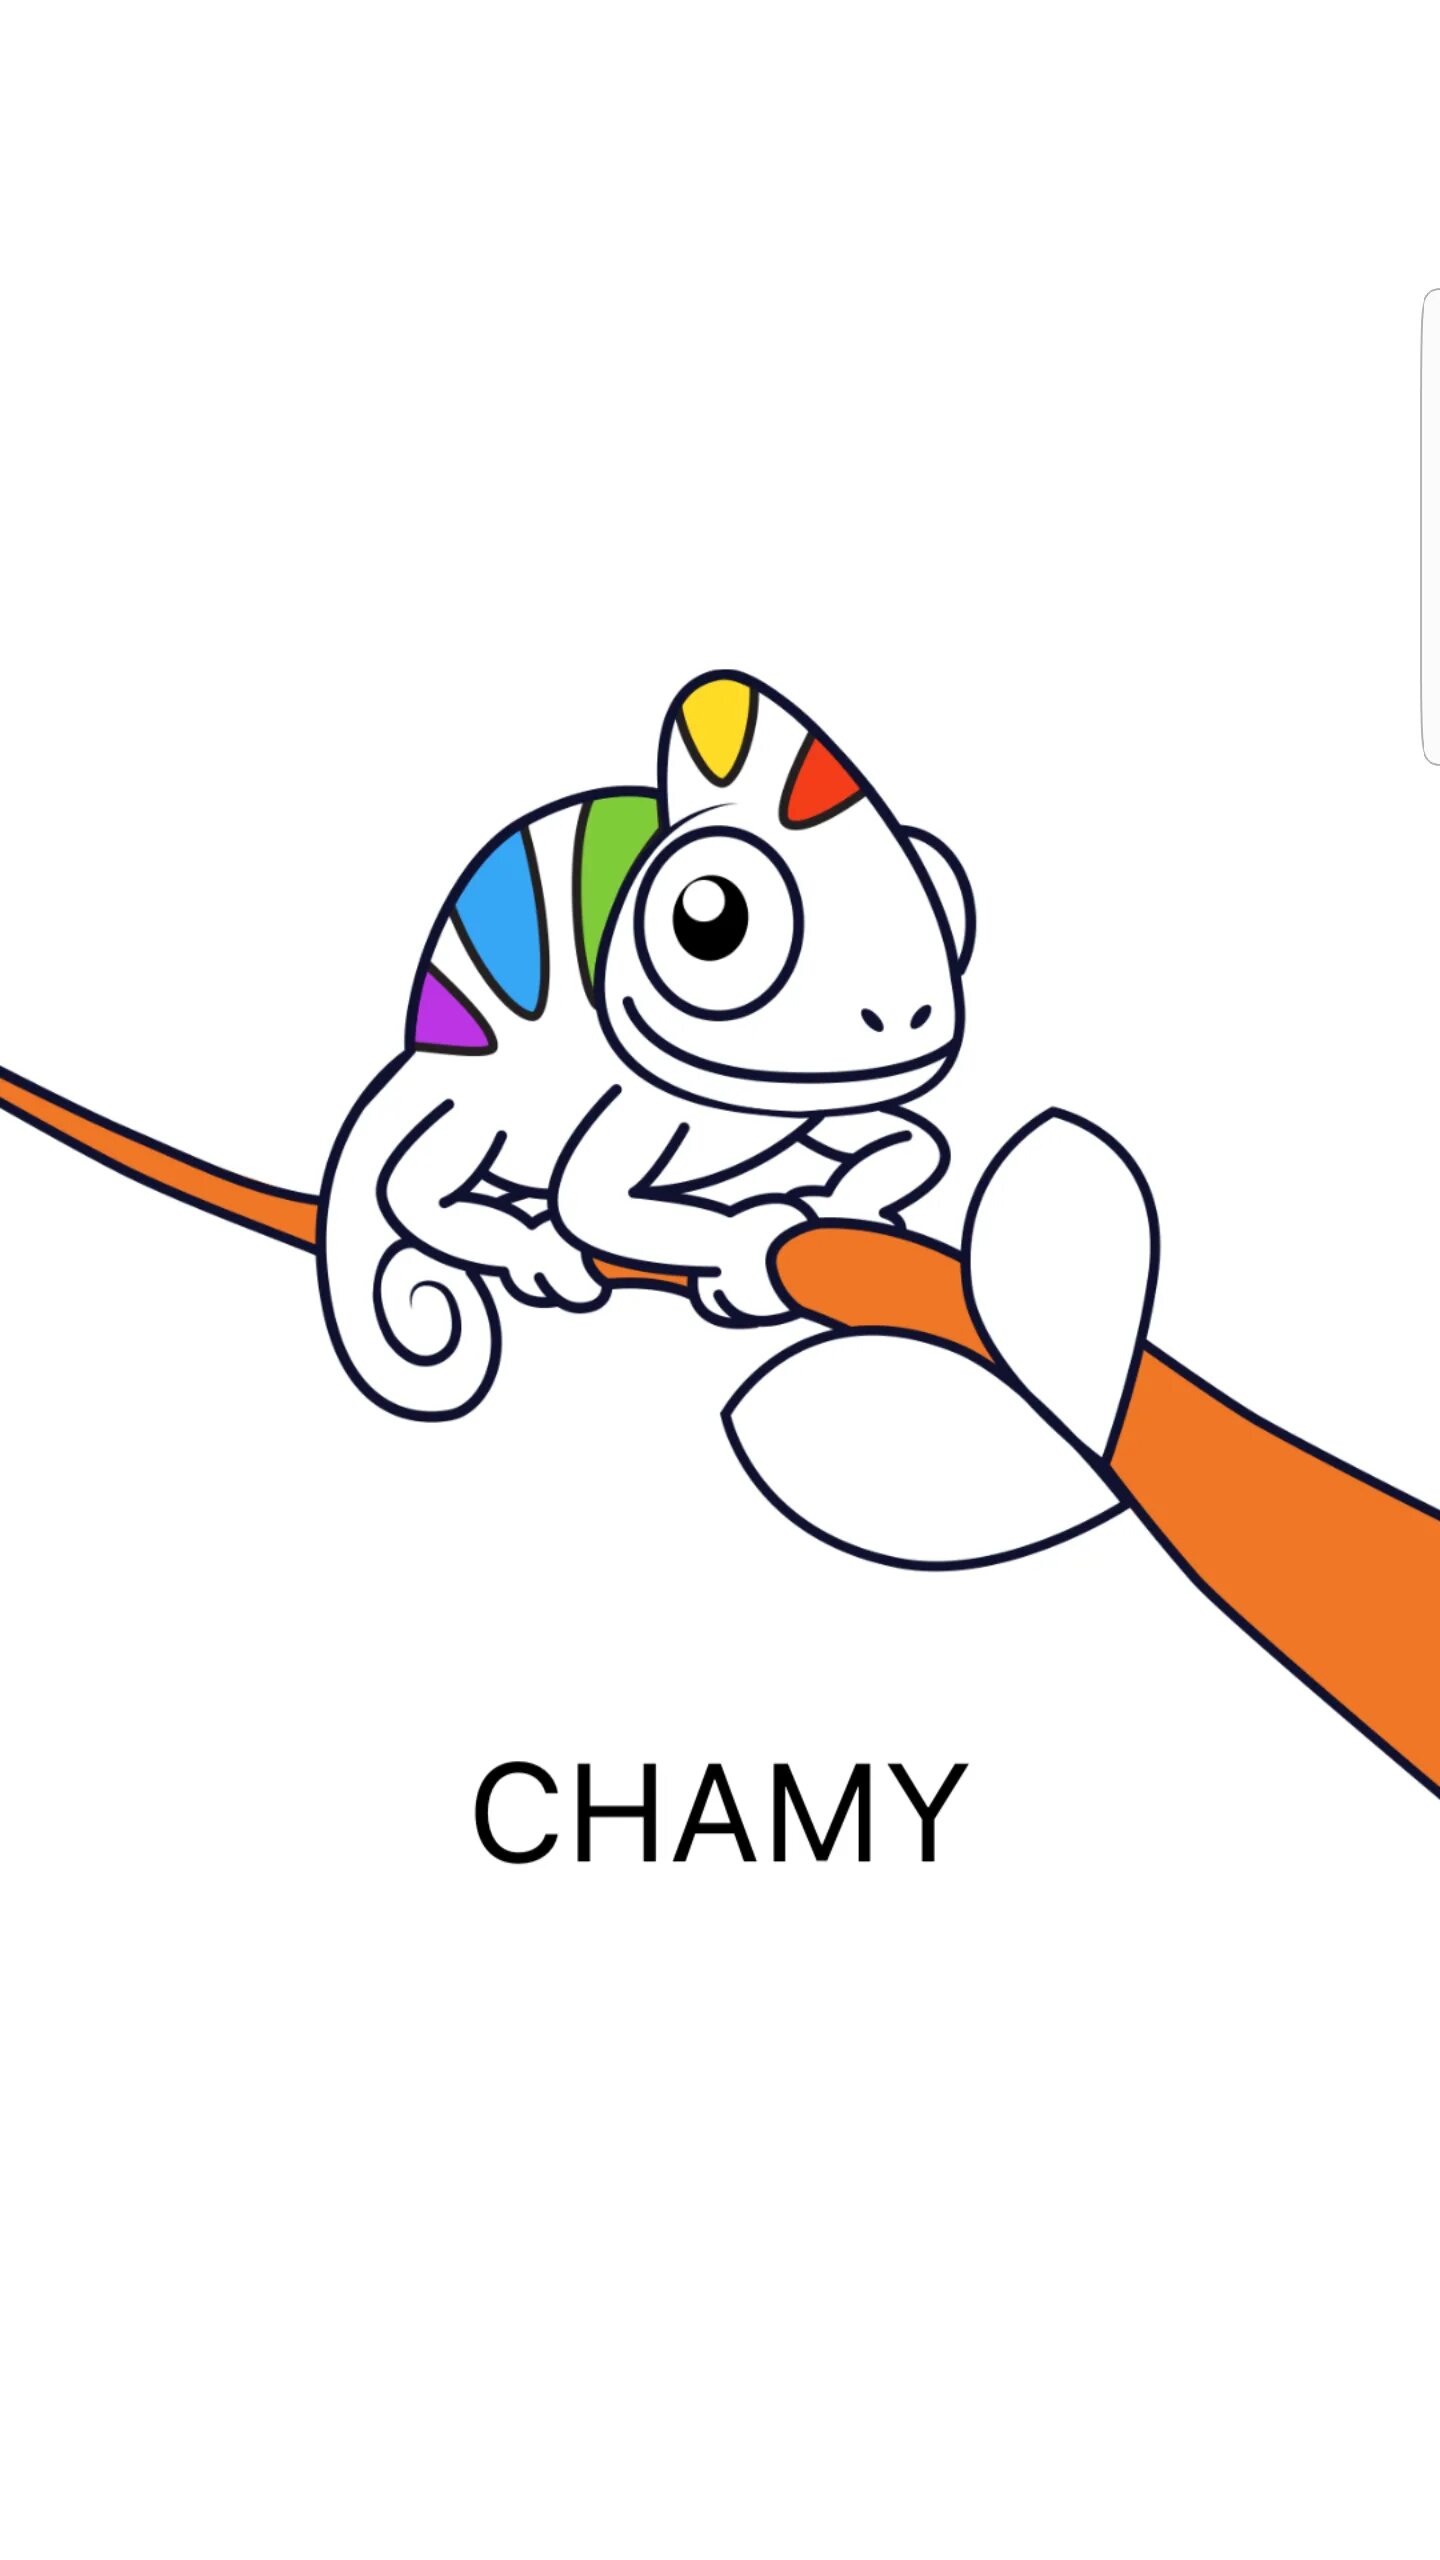 Cool chamy by number coloring book